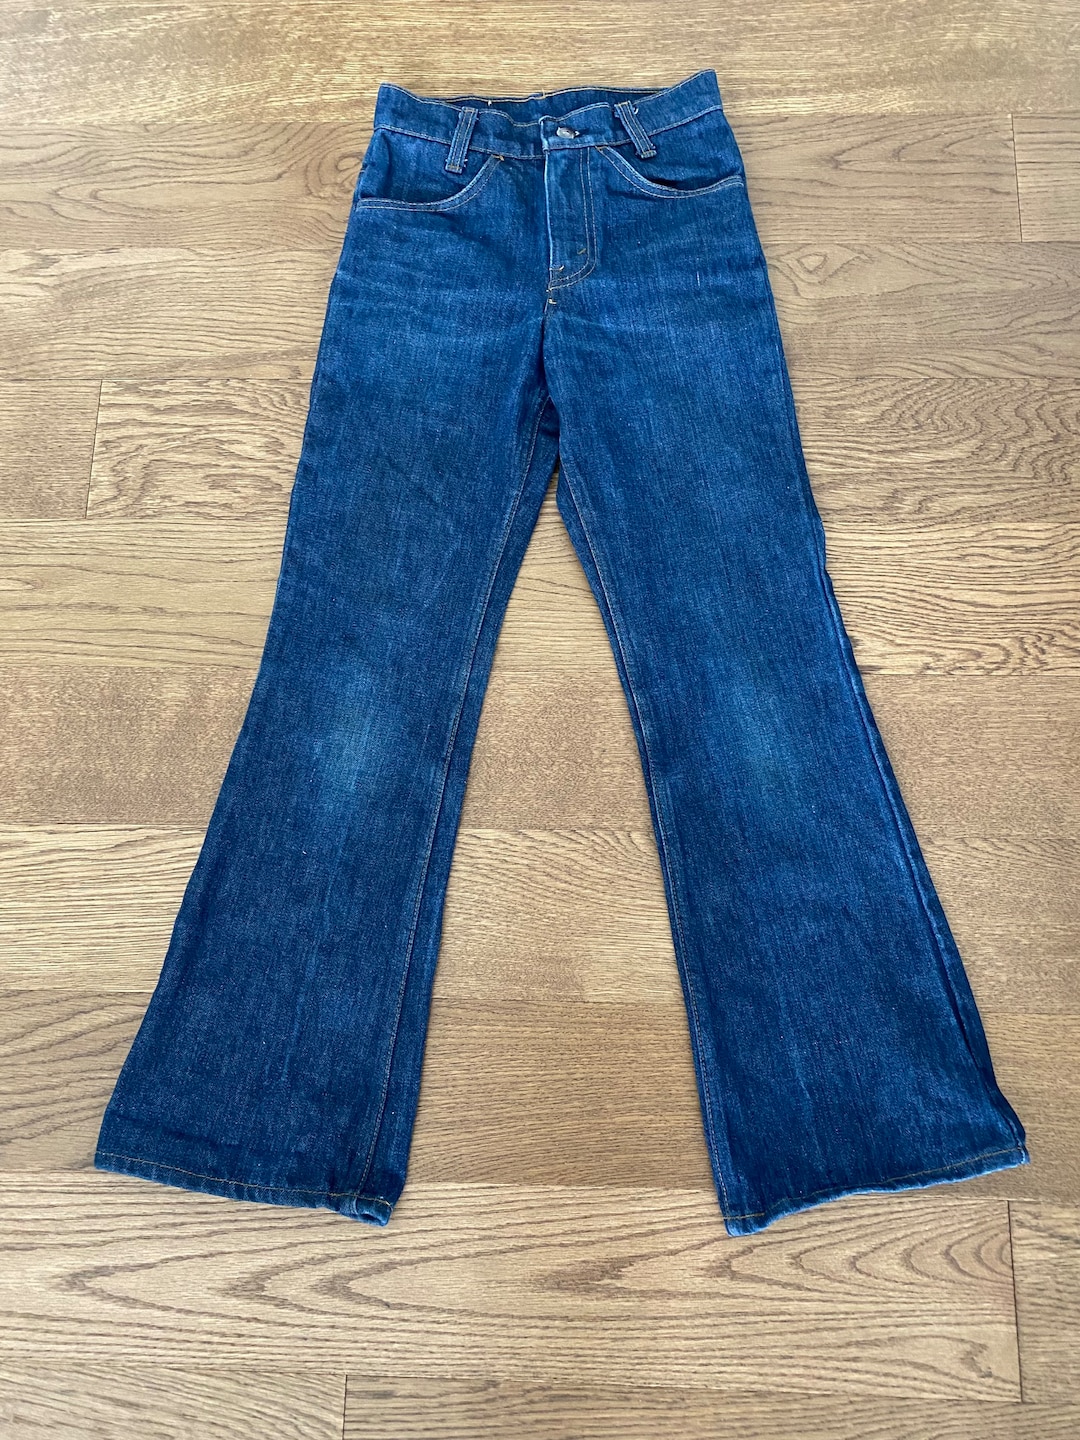 70s Levis Bell Bottoms Jeans Flares Dark Wash 746 24x27 - Etsy